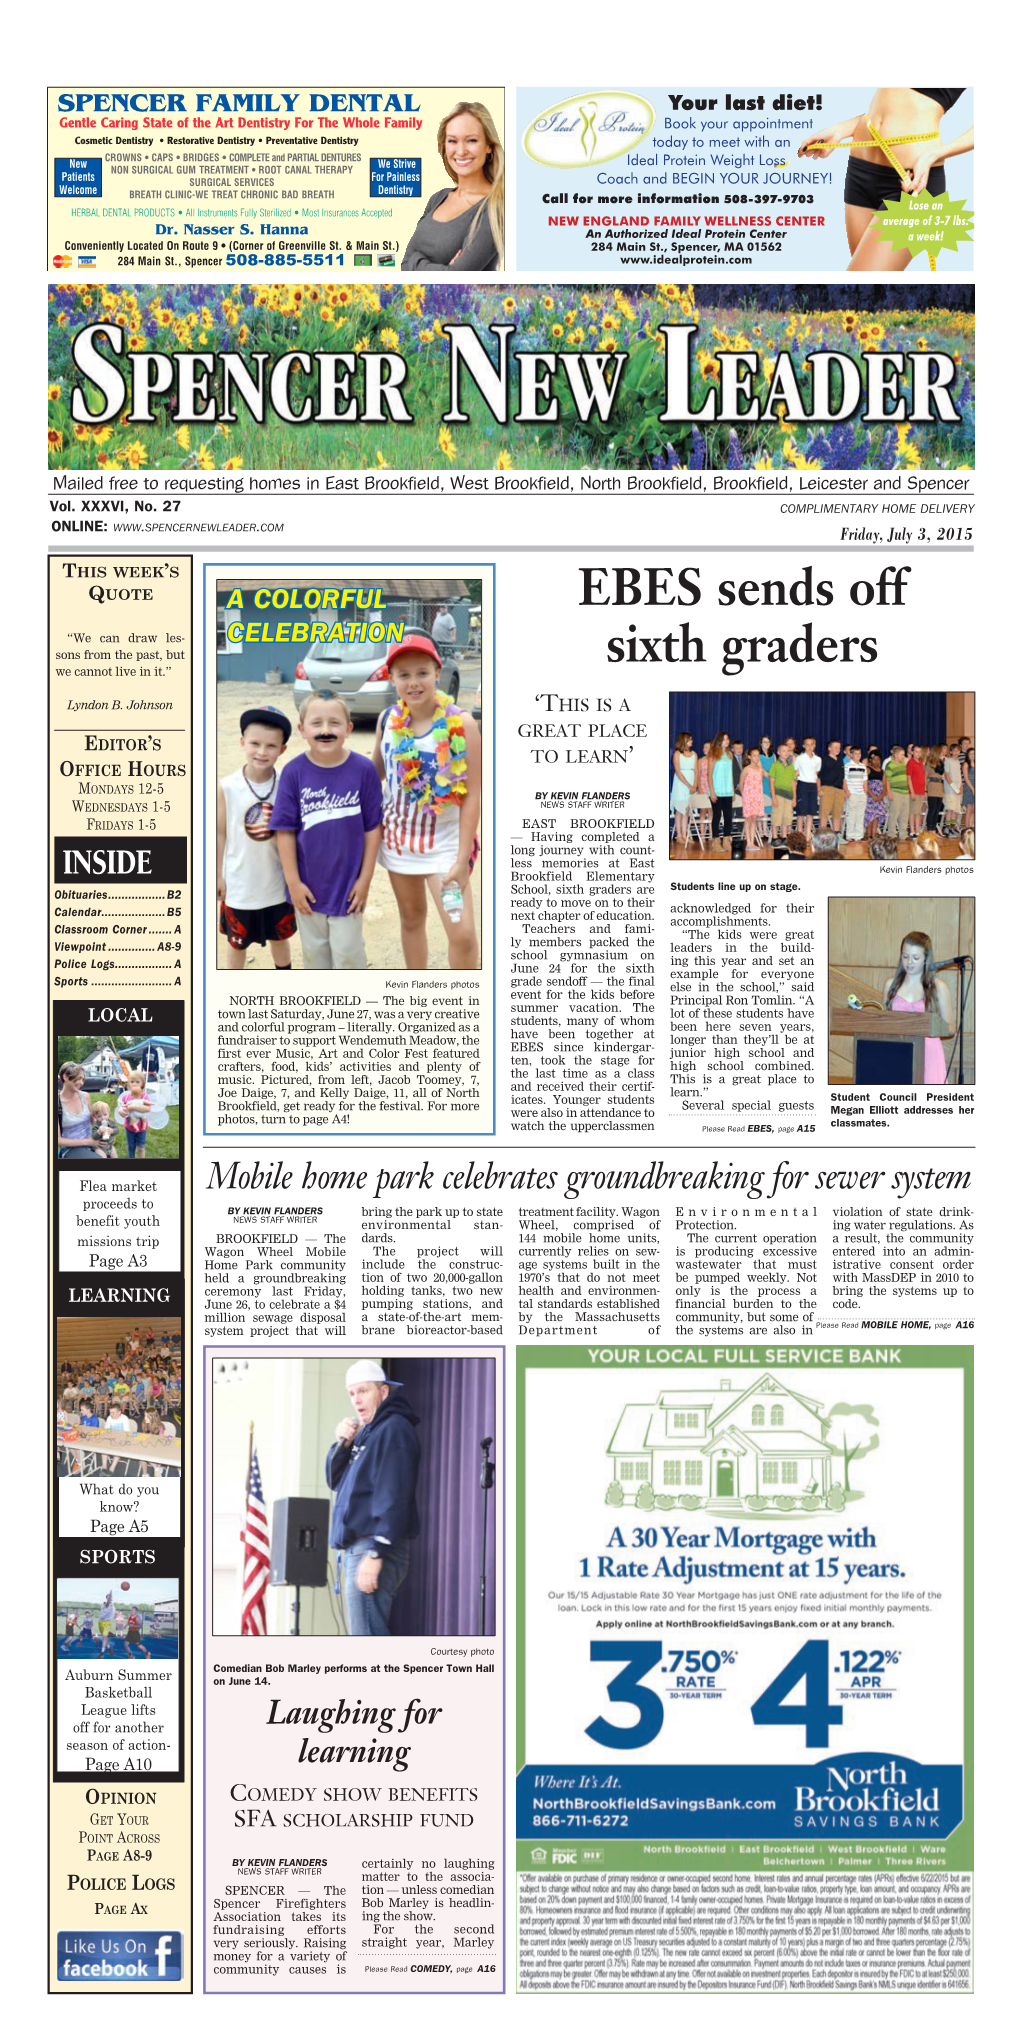 EBES Sends Off Sixth Graders